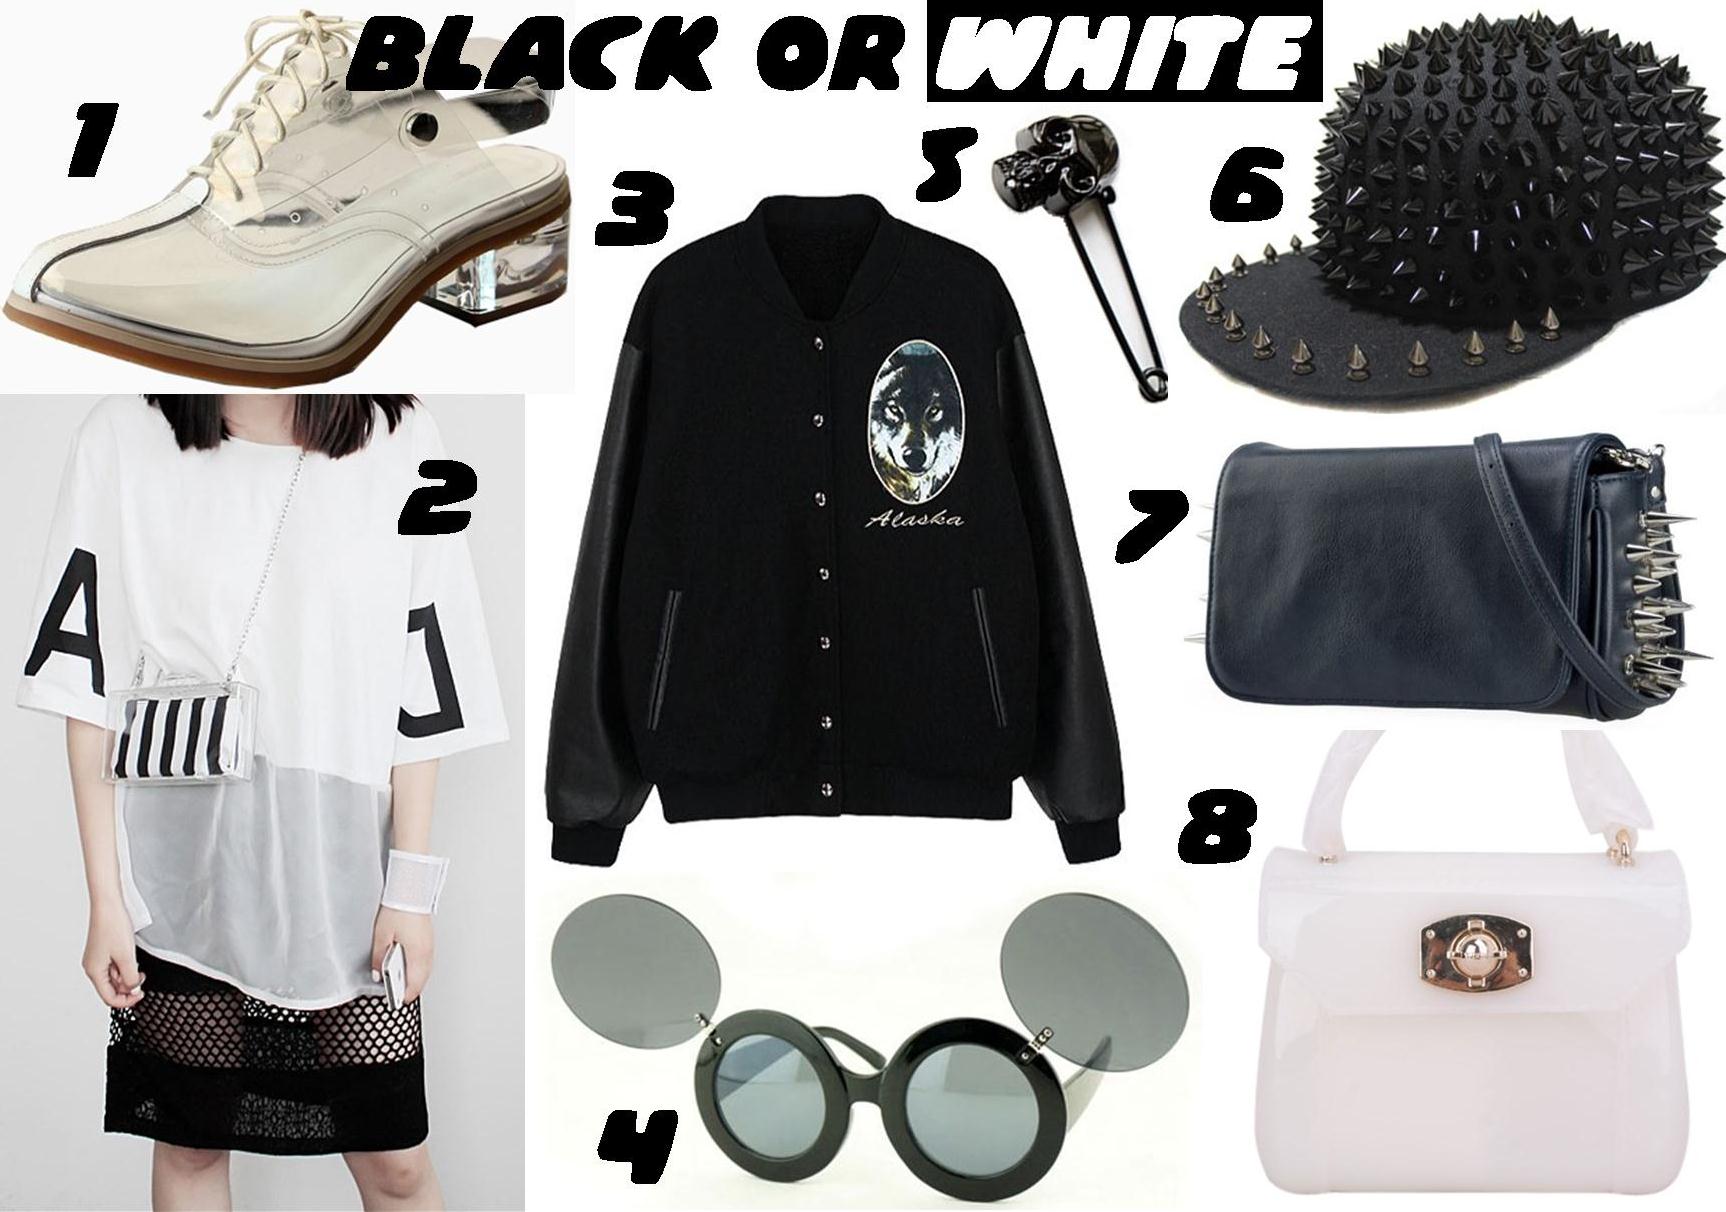 Black and White from Choies S/S 2013